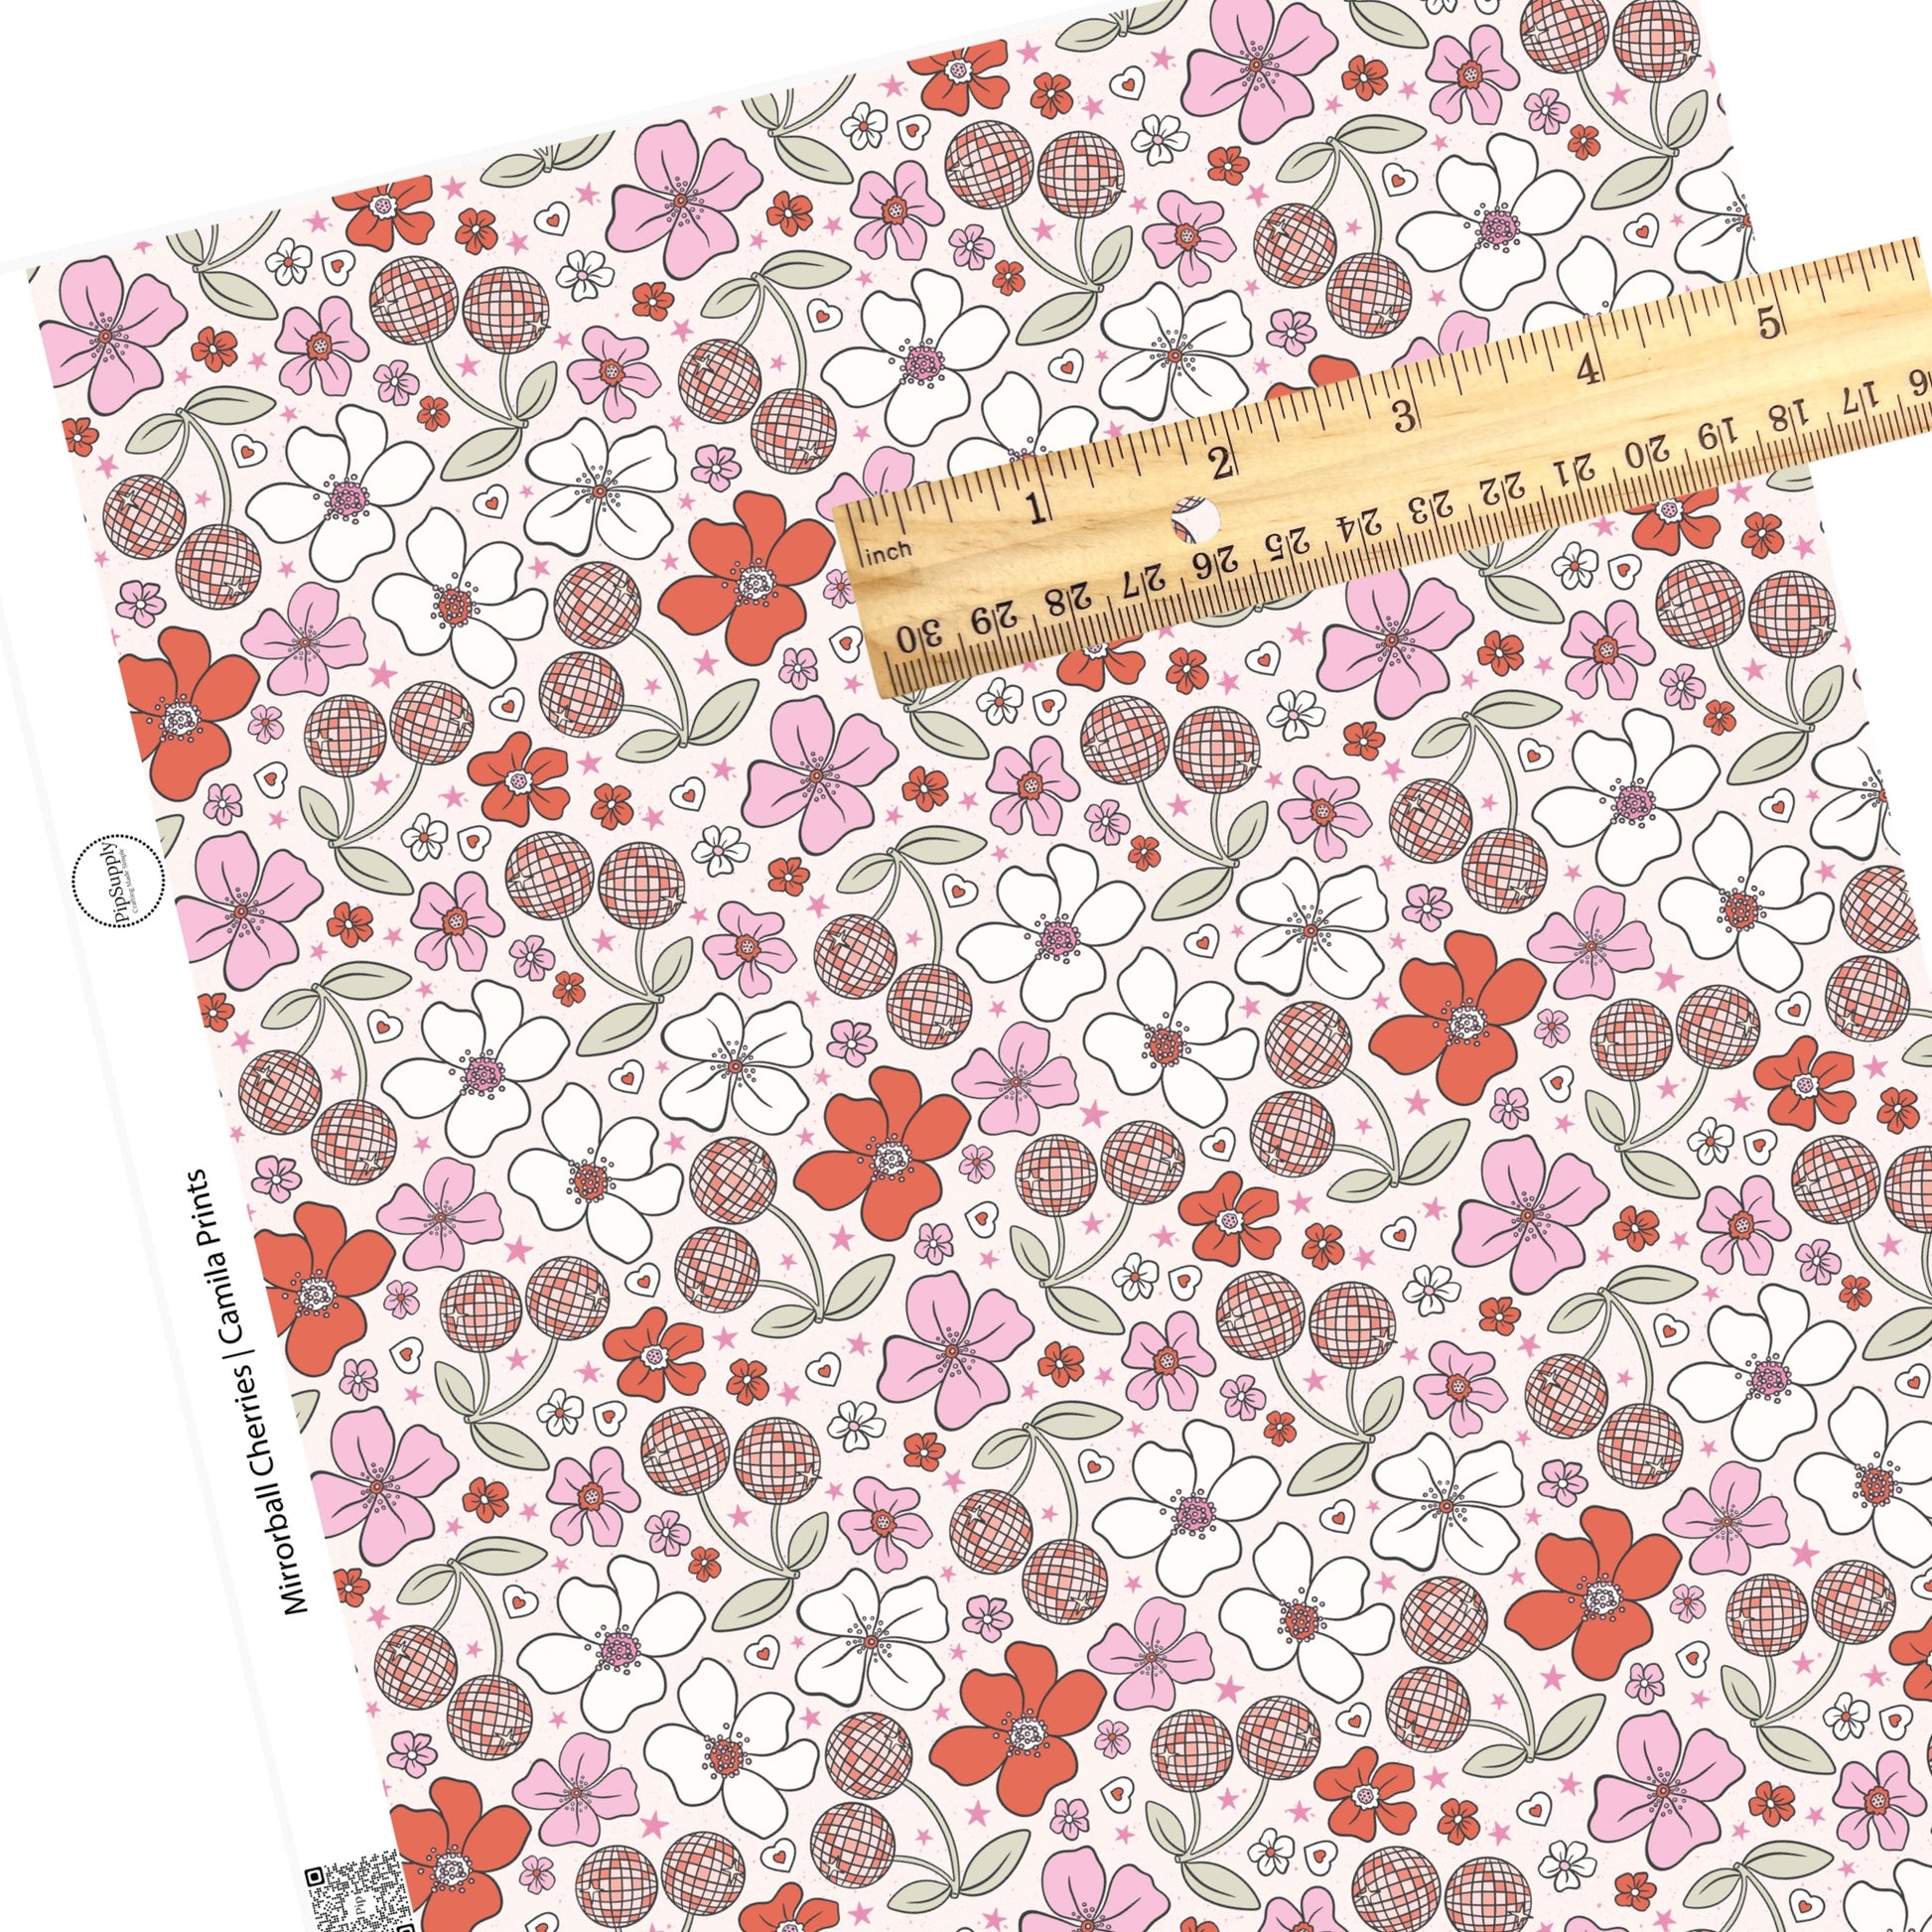 Flowers with pink stars and disco cherries on white faux leather sheets